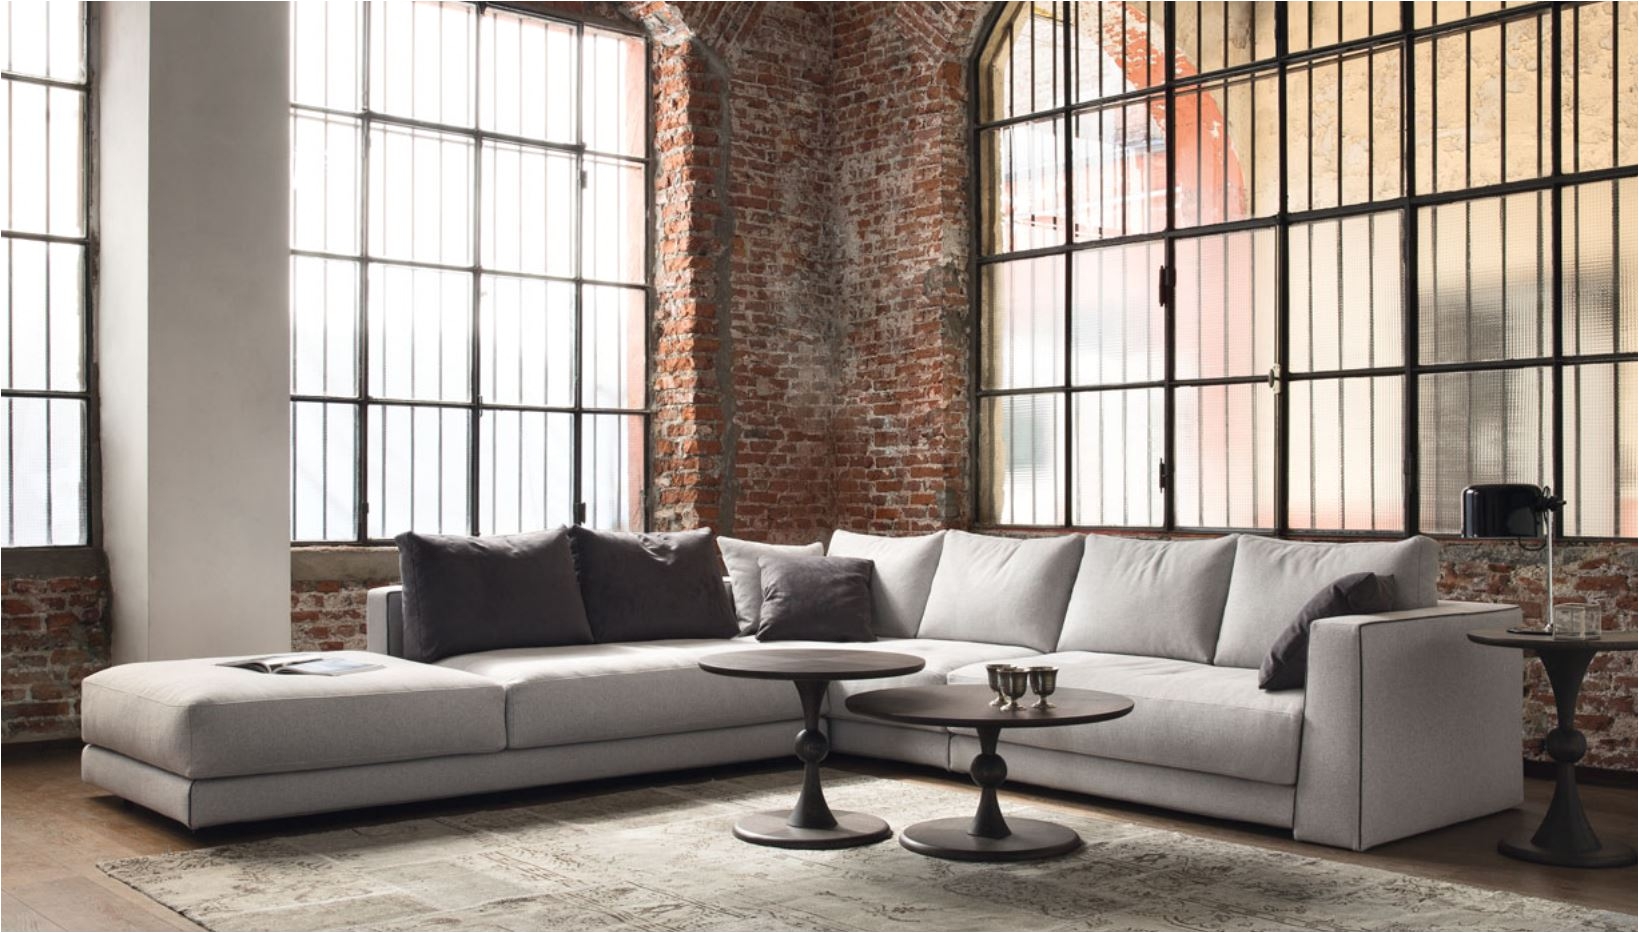 table endearing modern sectional sofas 31 italian furniture sofa leather at designer b all modern sectional